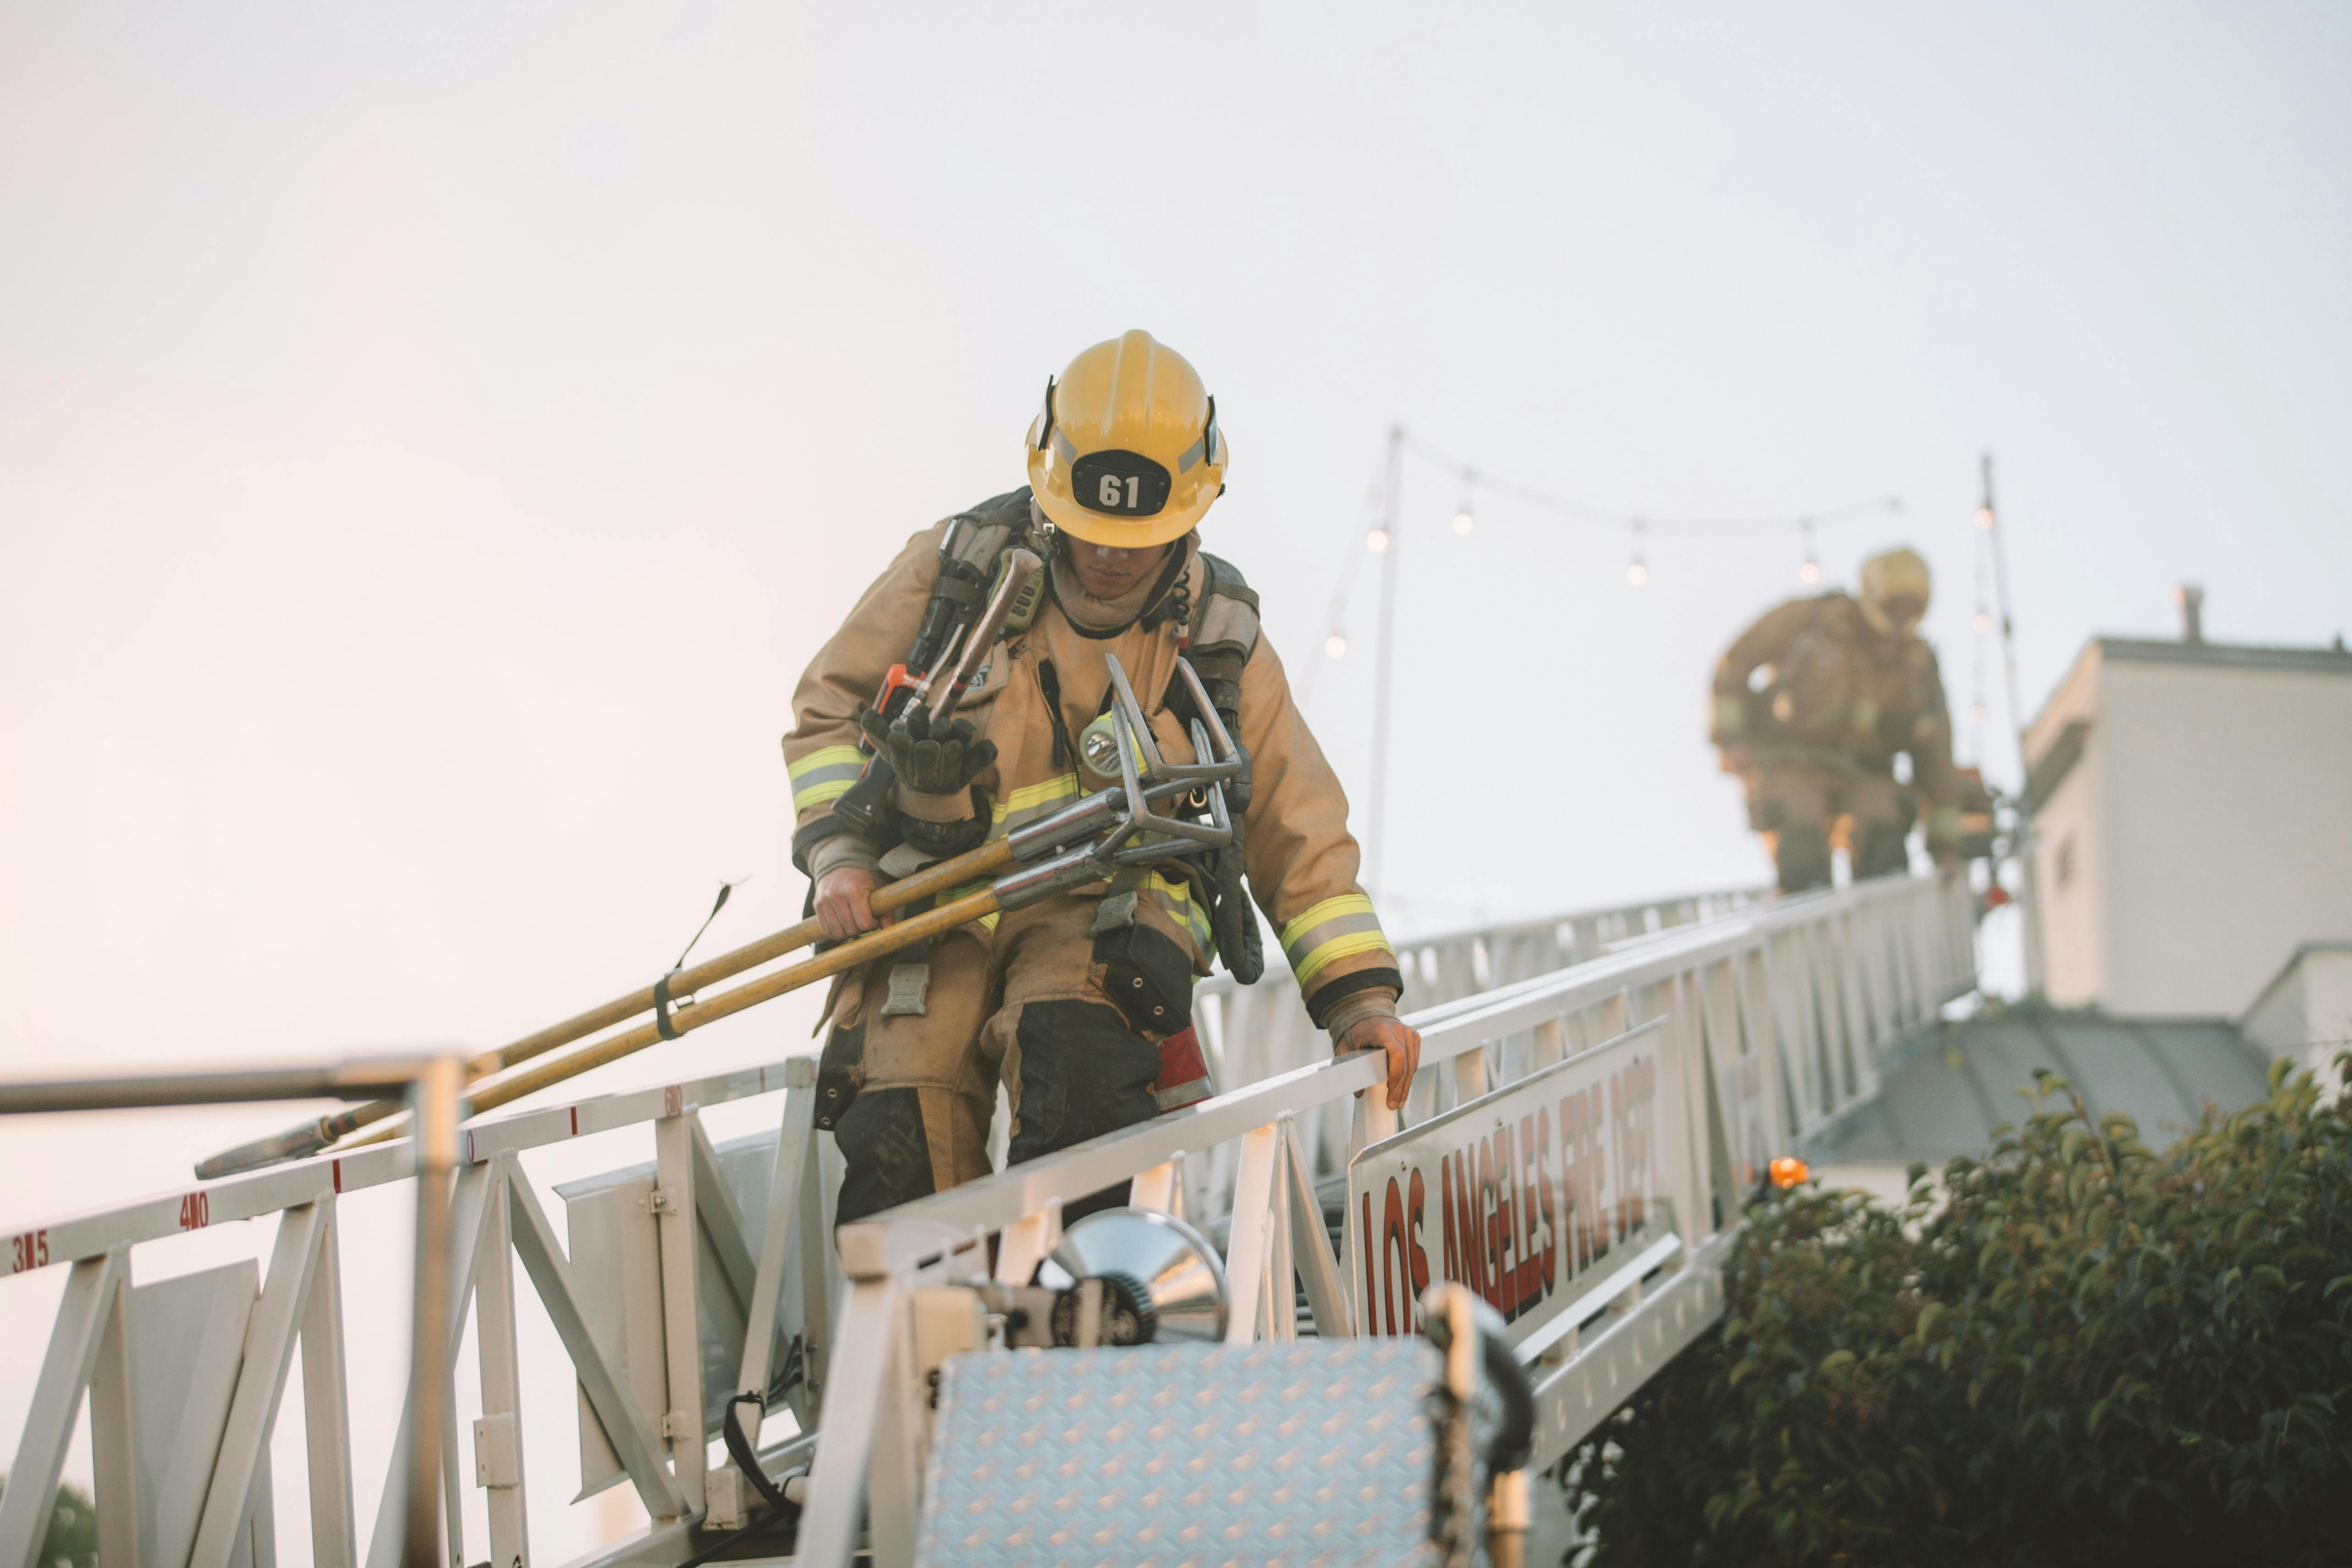 A volunteer Fire Fighter in a ladder with a partner behind him